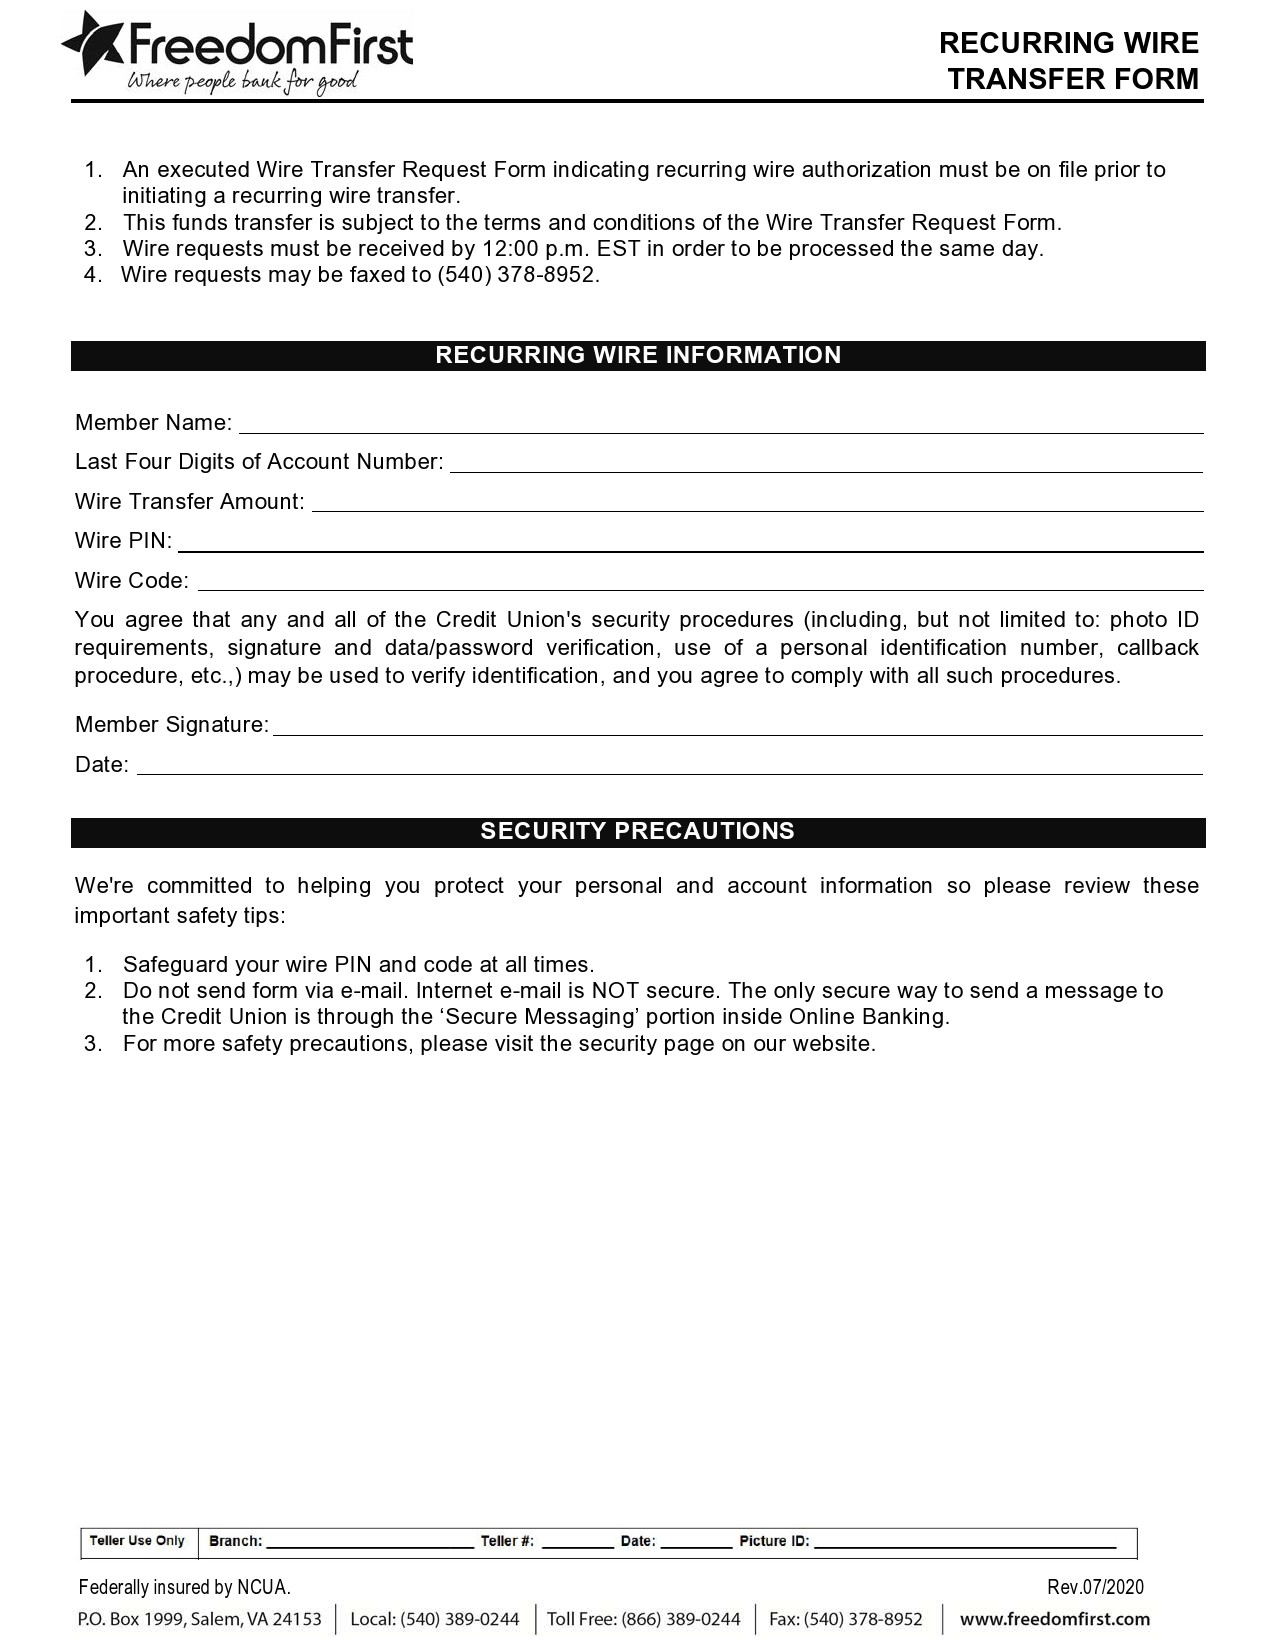 Free wire transfer form 26